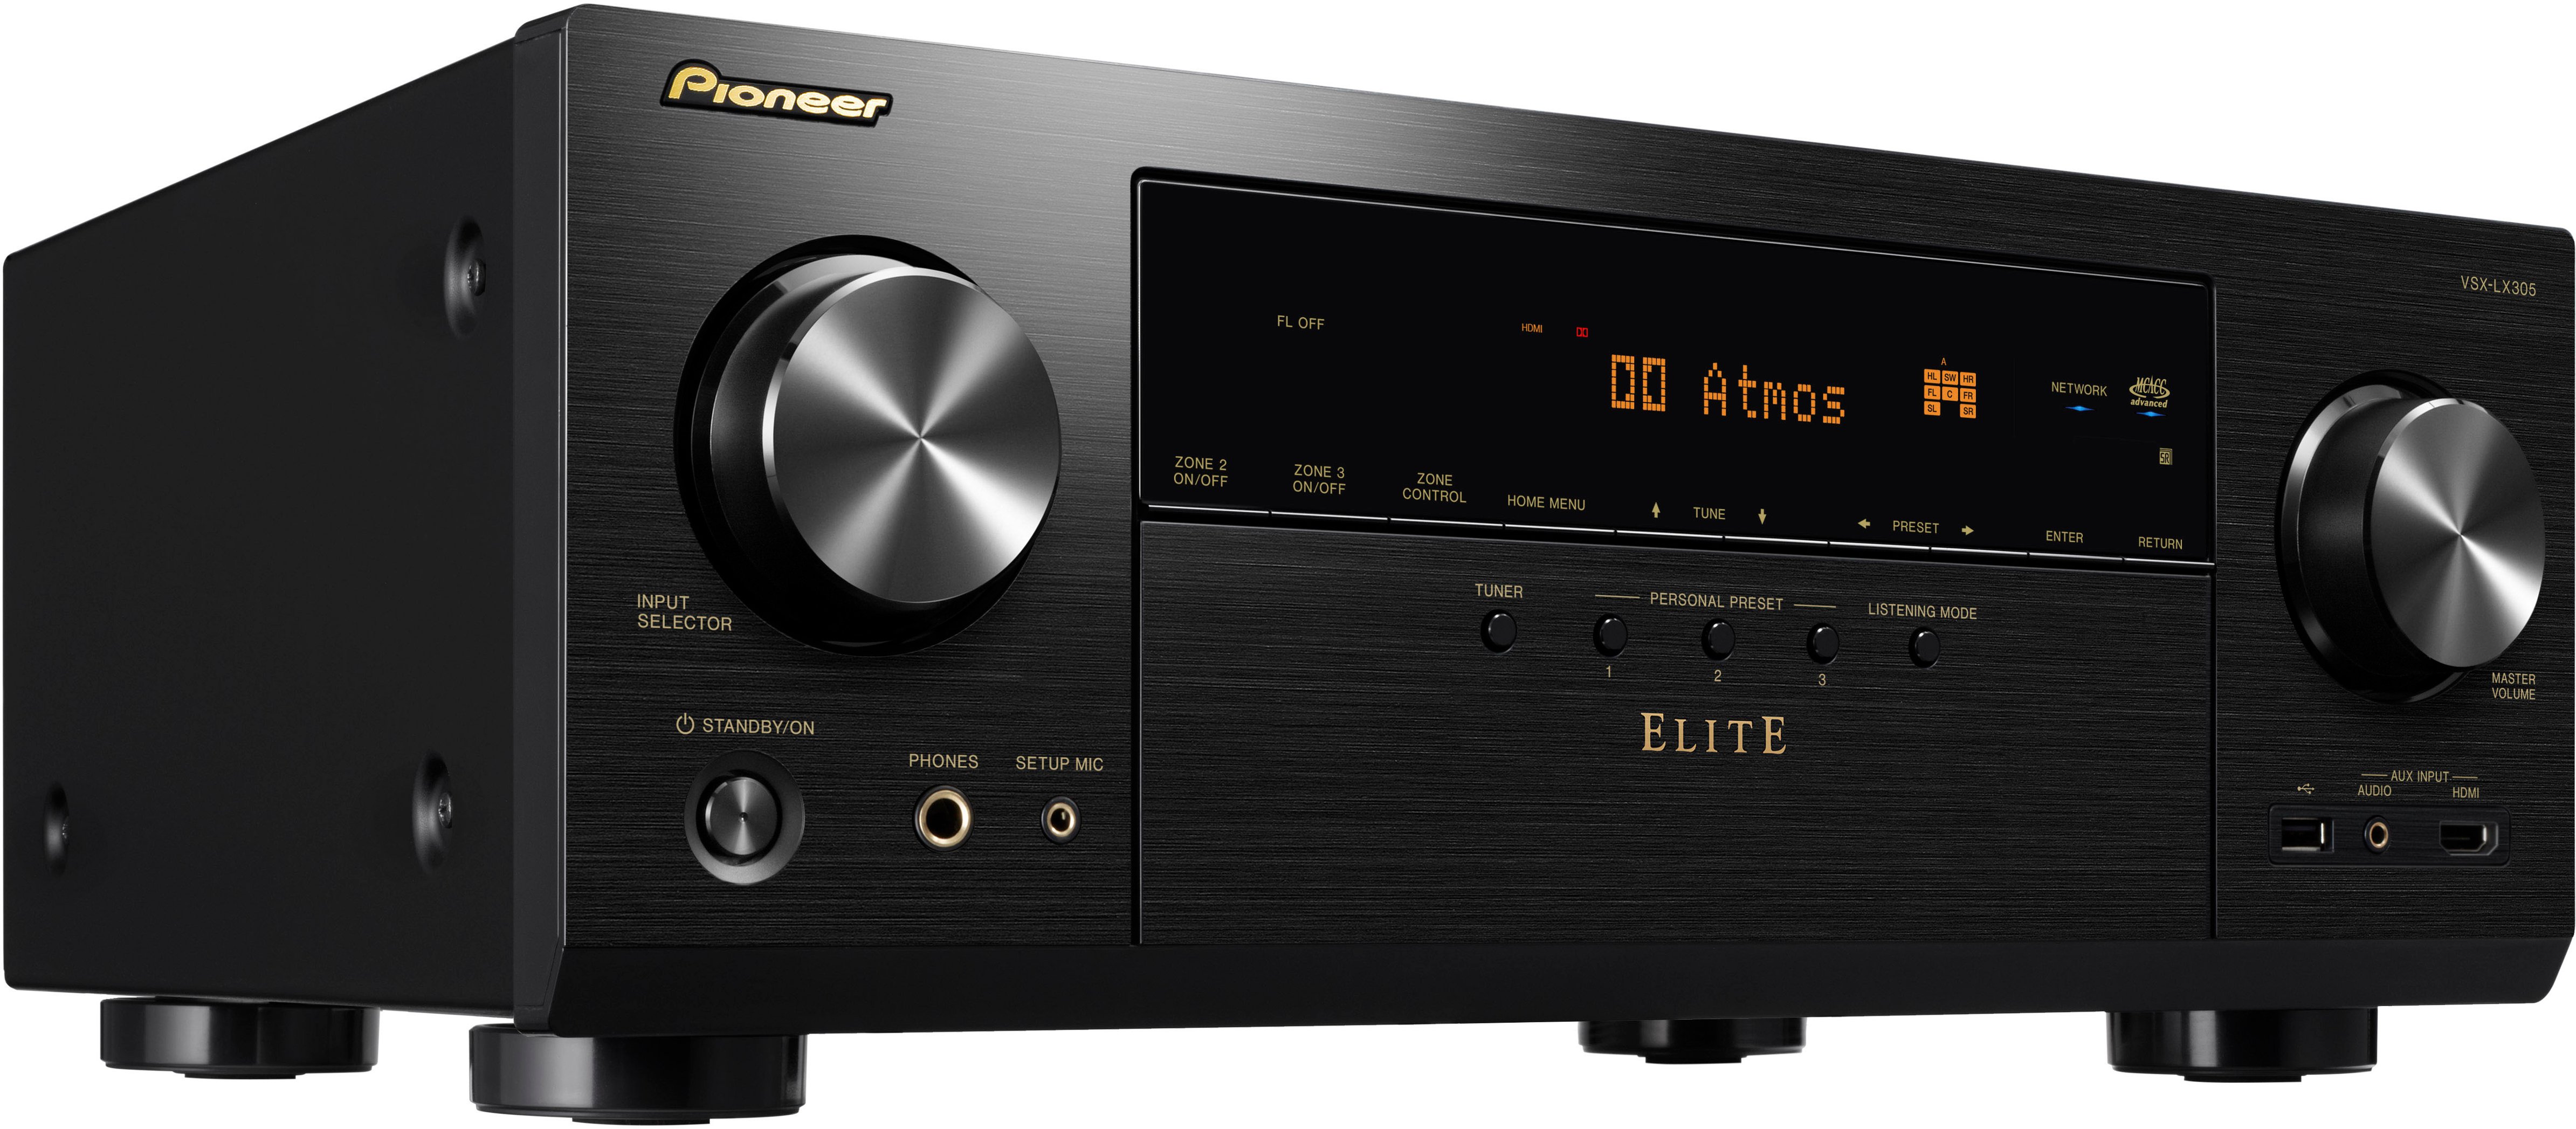 Angle View: Marantz SR8012 11.2 Channel AVR, Supports Auro 3D, IMAX Enhanced, Dolby Atmos, Wireless Music Streaming & Voice Control - Black